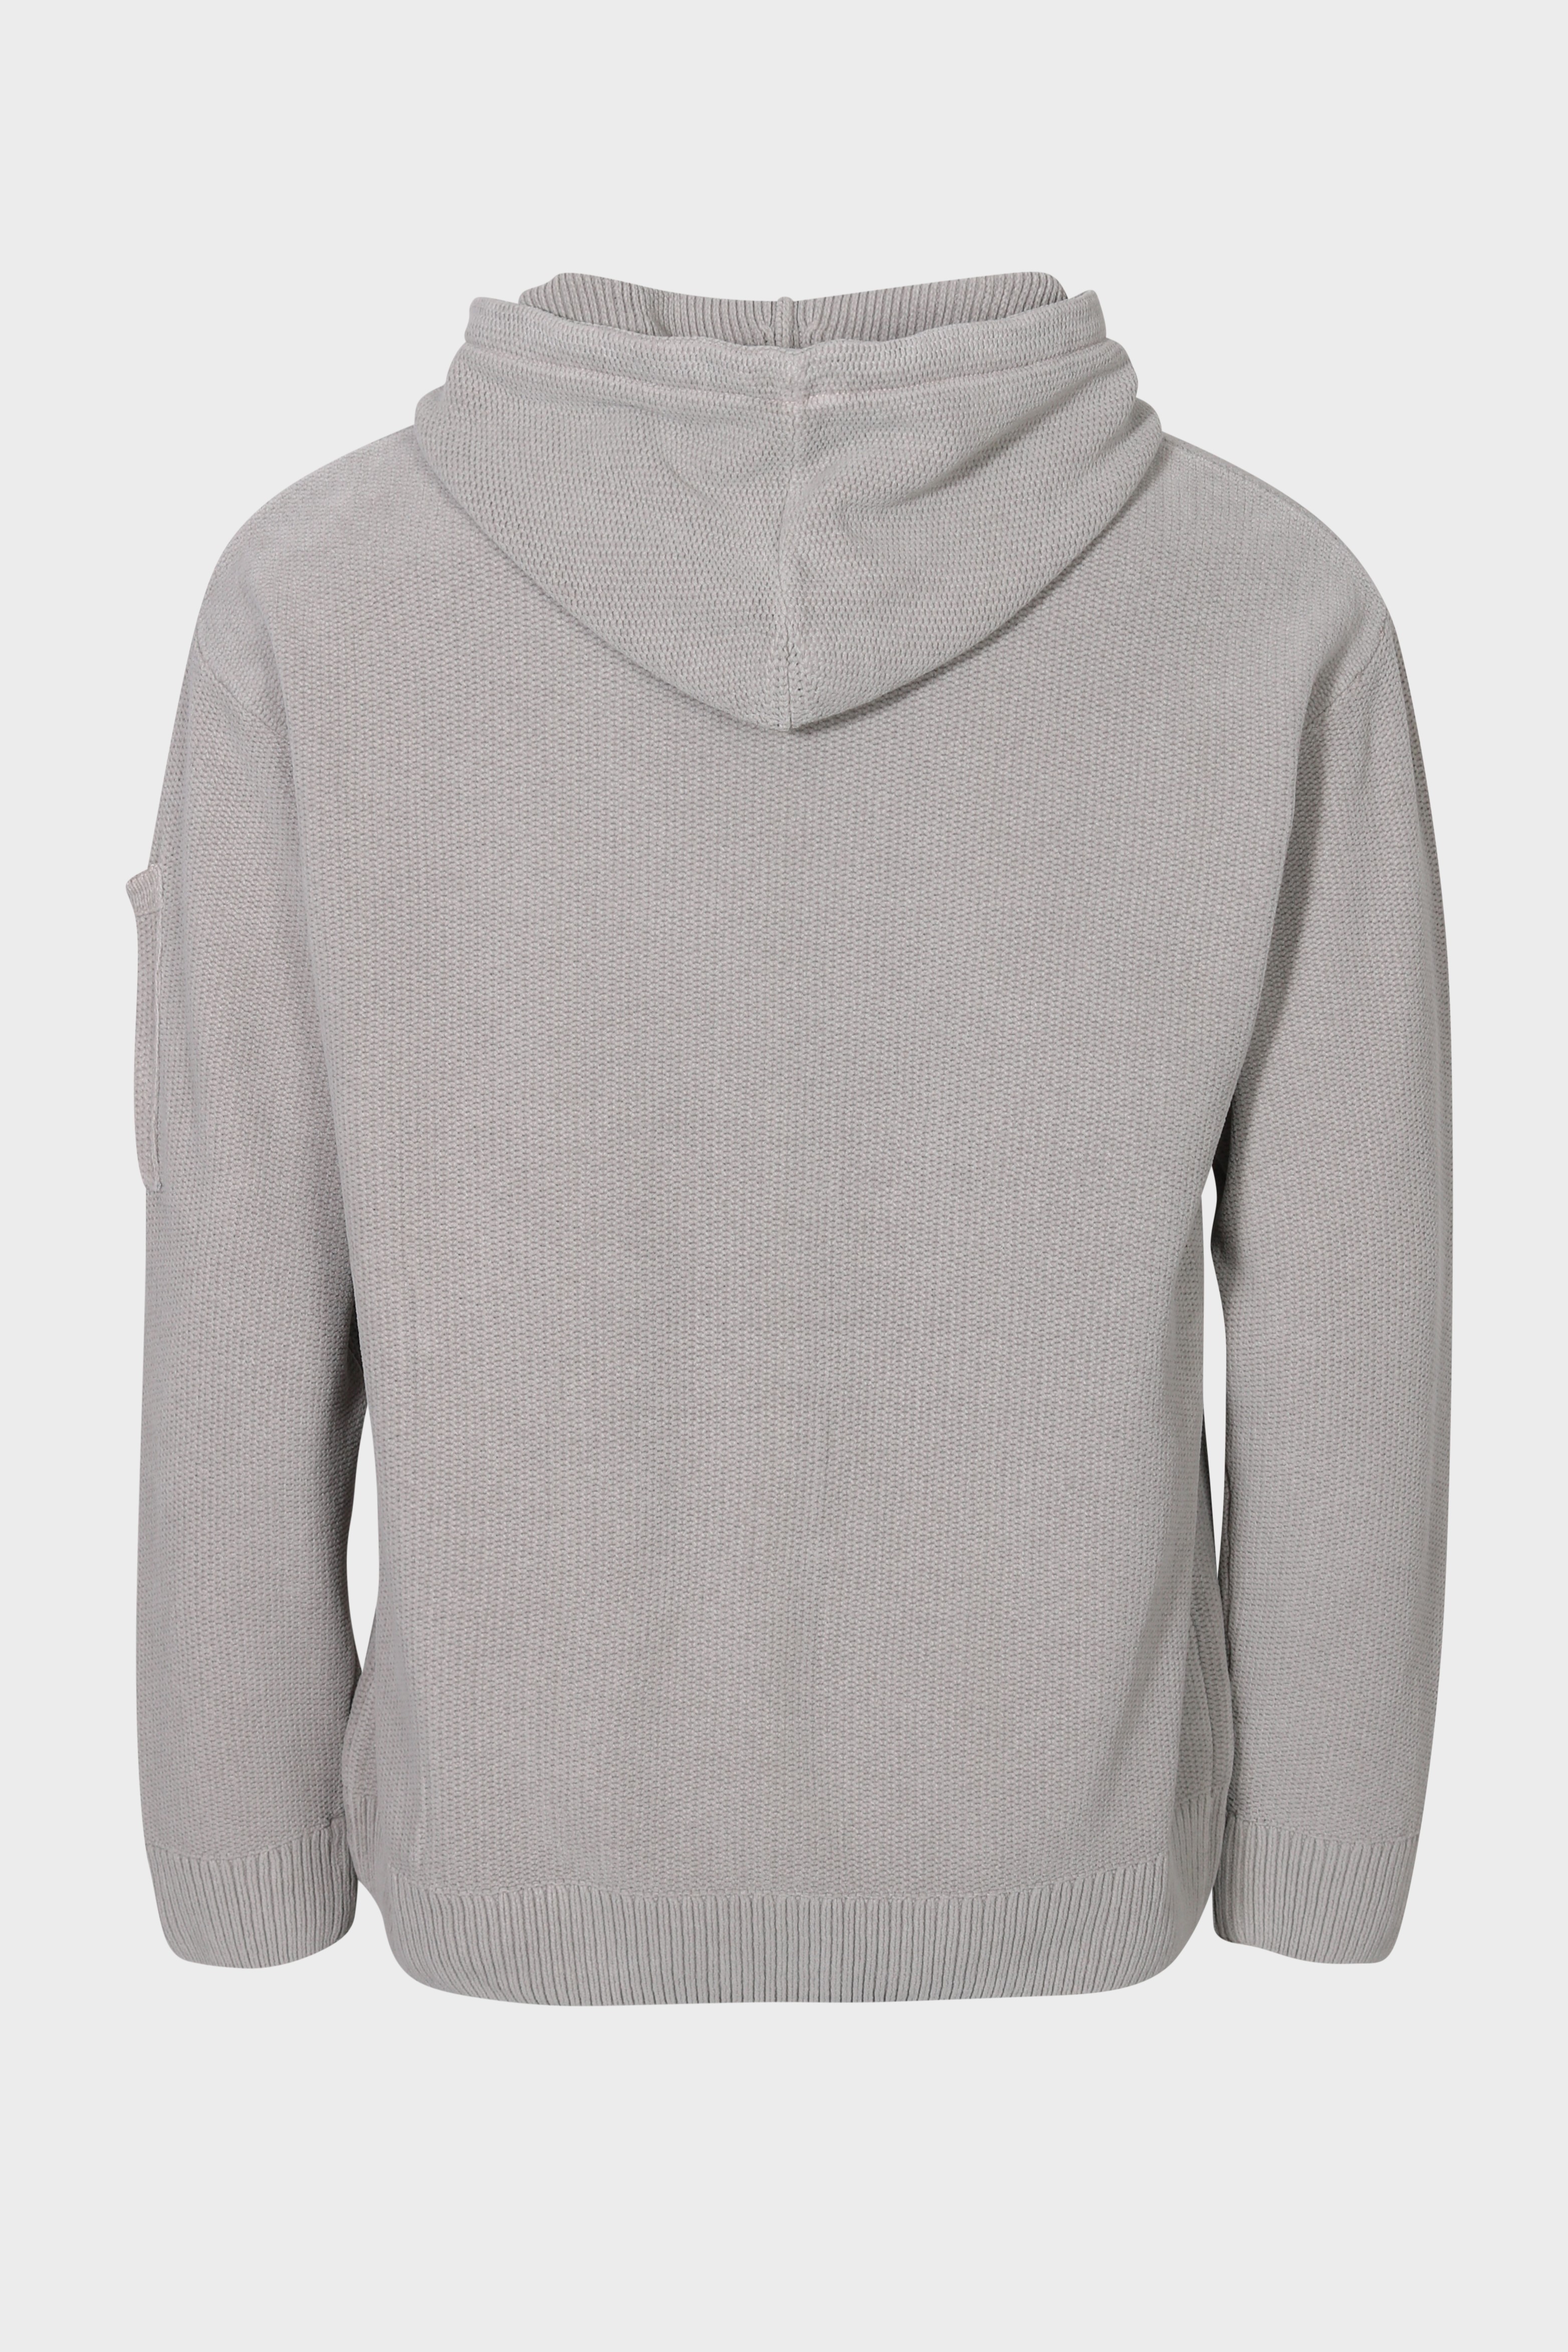 C.P. COMPANY Soft Knit Hoodie in Drizzle Grey